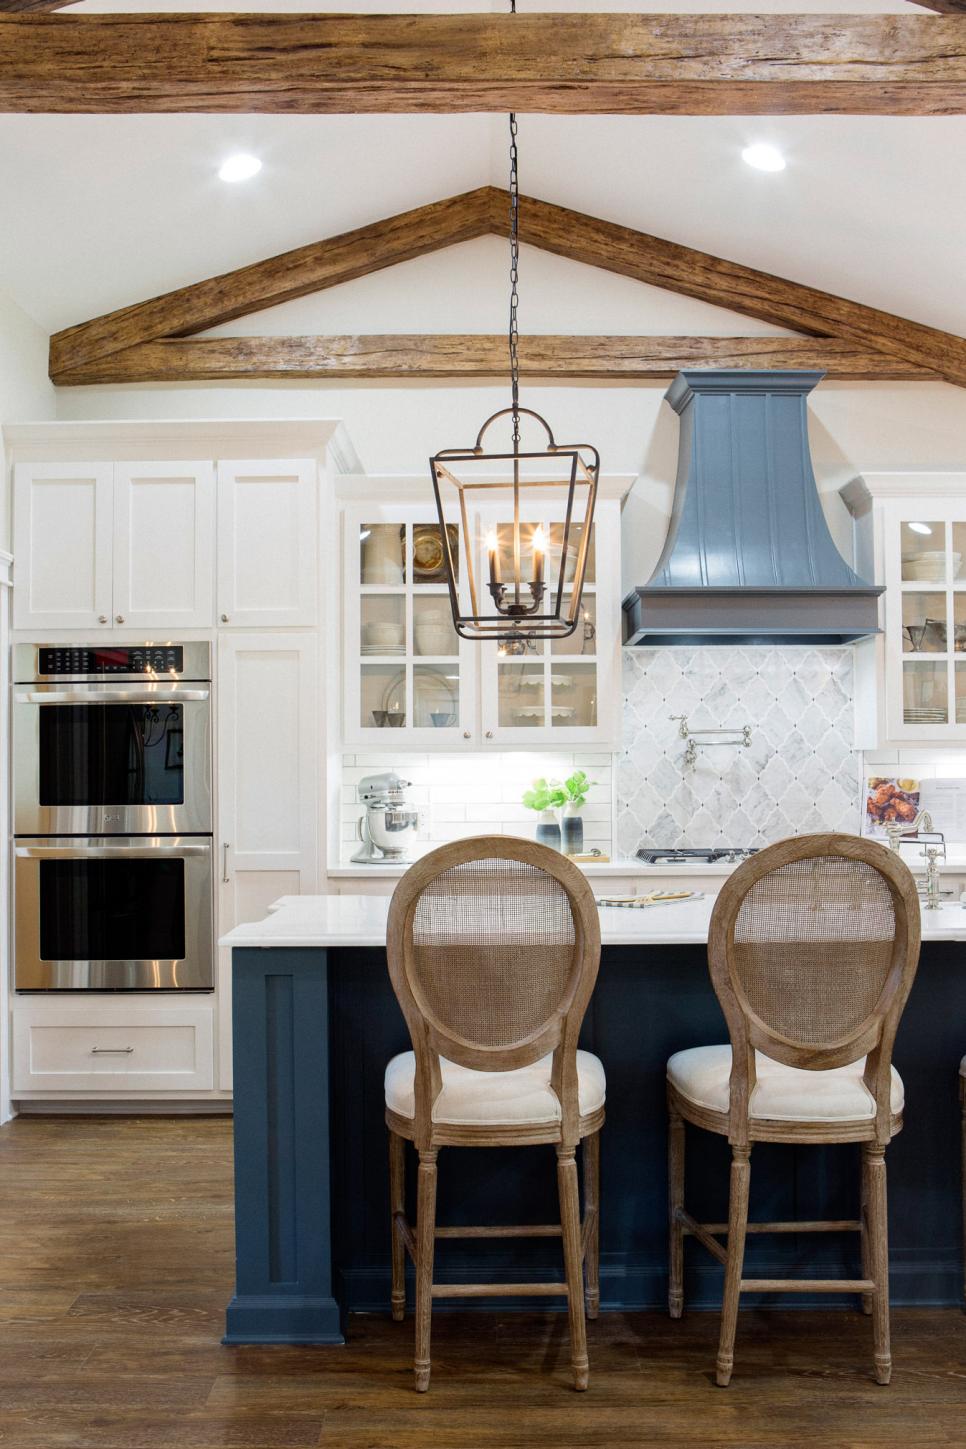 Light and Bright Kitchen With Exposed Beam Vaulted Ceilings | HGTV